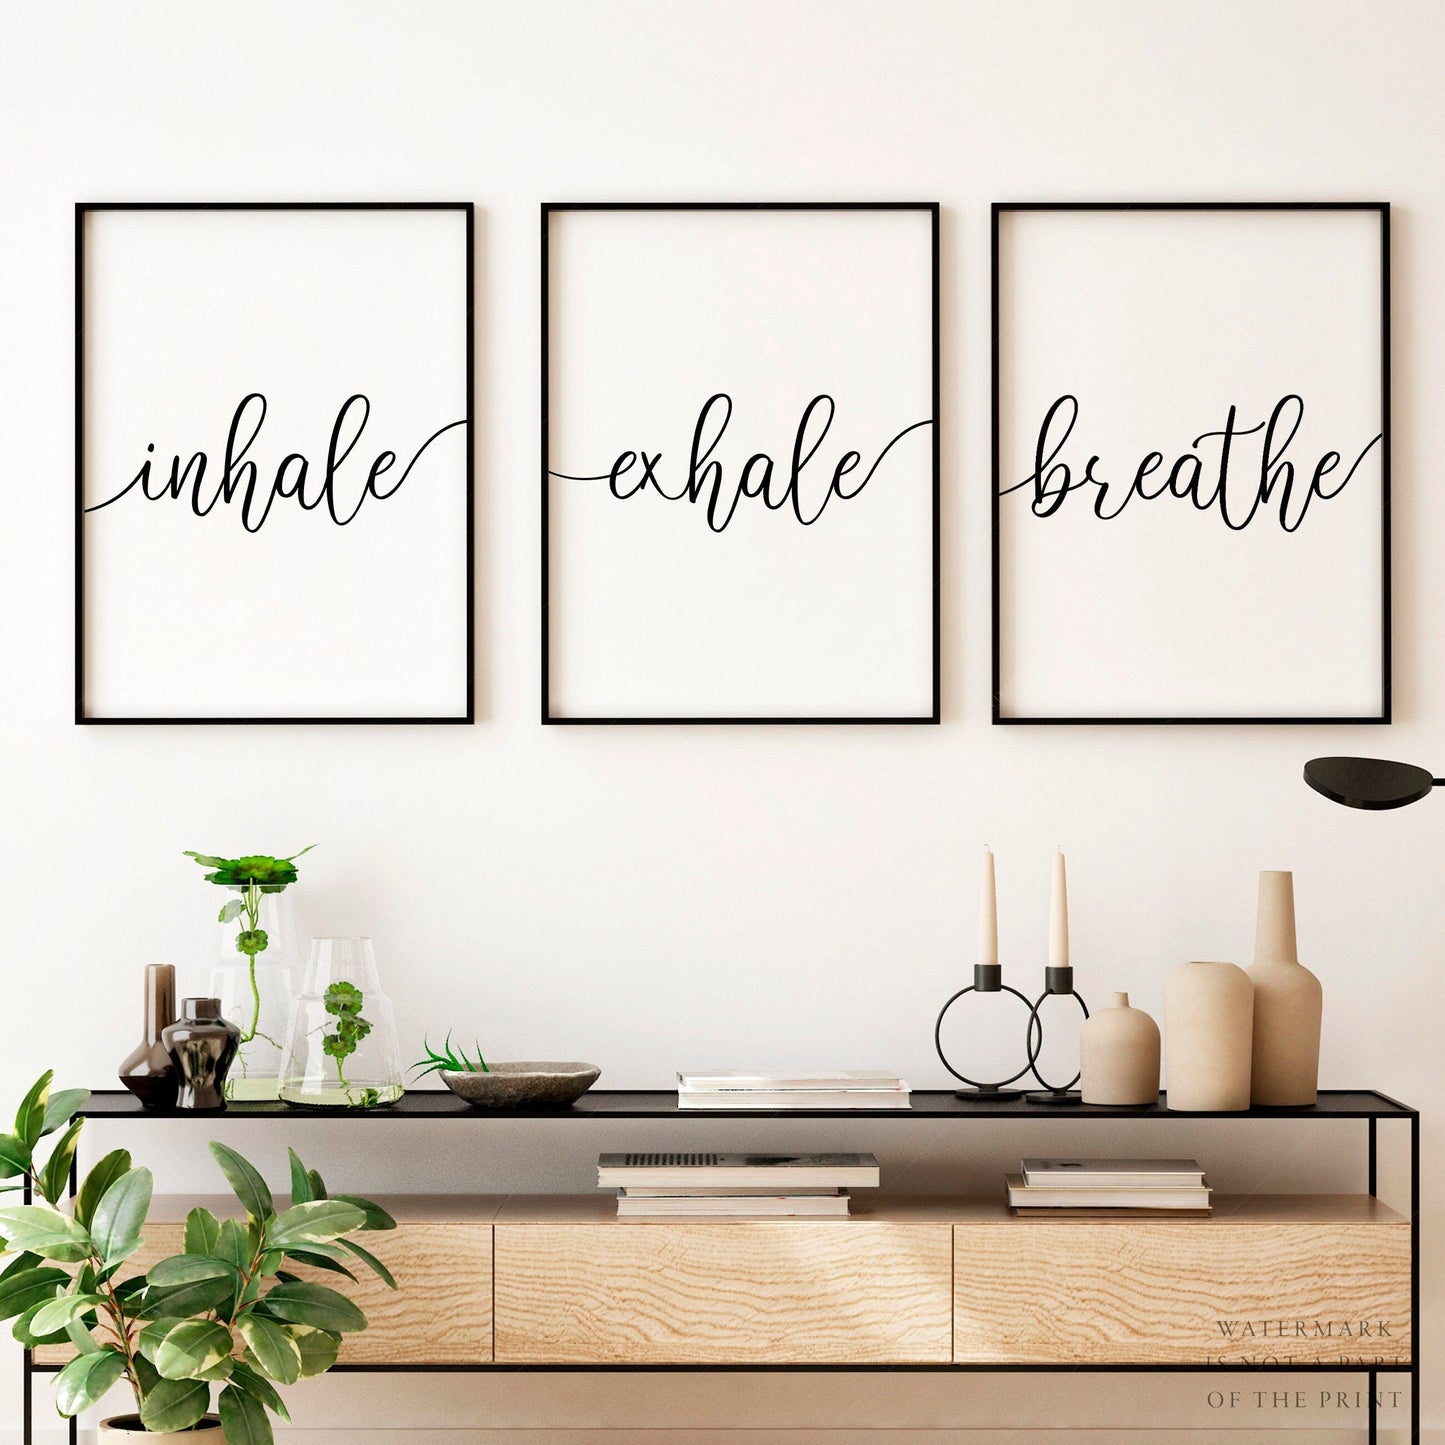 Home Poster Decor Set of 3 print, Bedroom Wall Art, Inhale Exhale Breathe, Above bed decor, Black White print, Mindfulness Art, Relax Sign up to 24"x36"